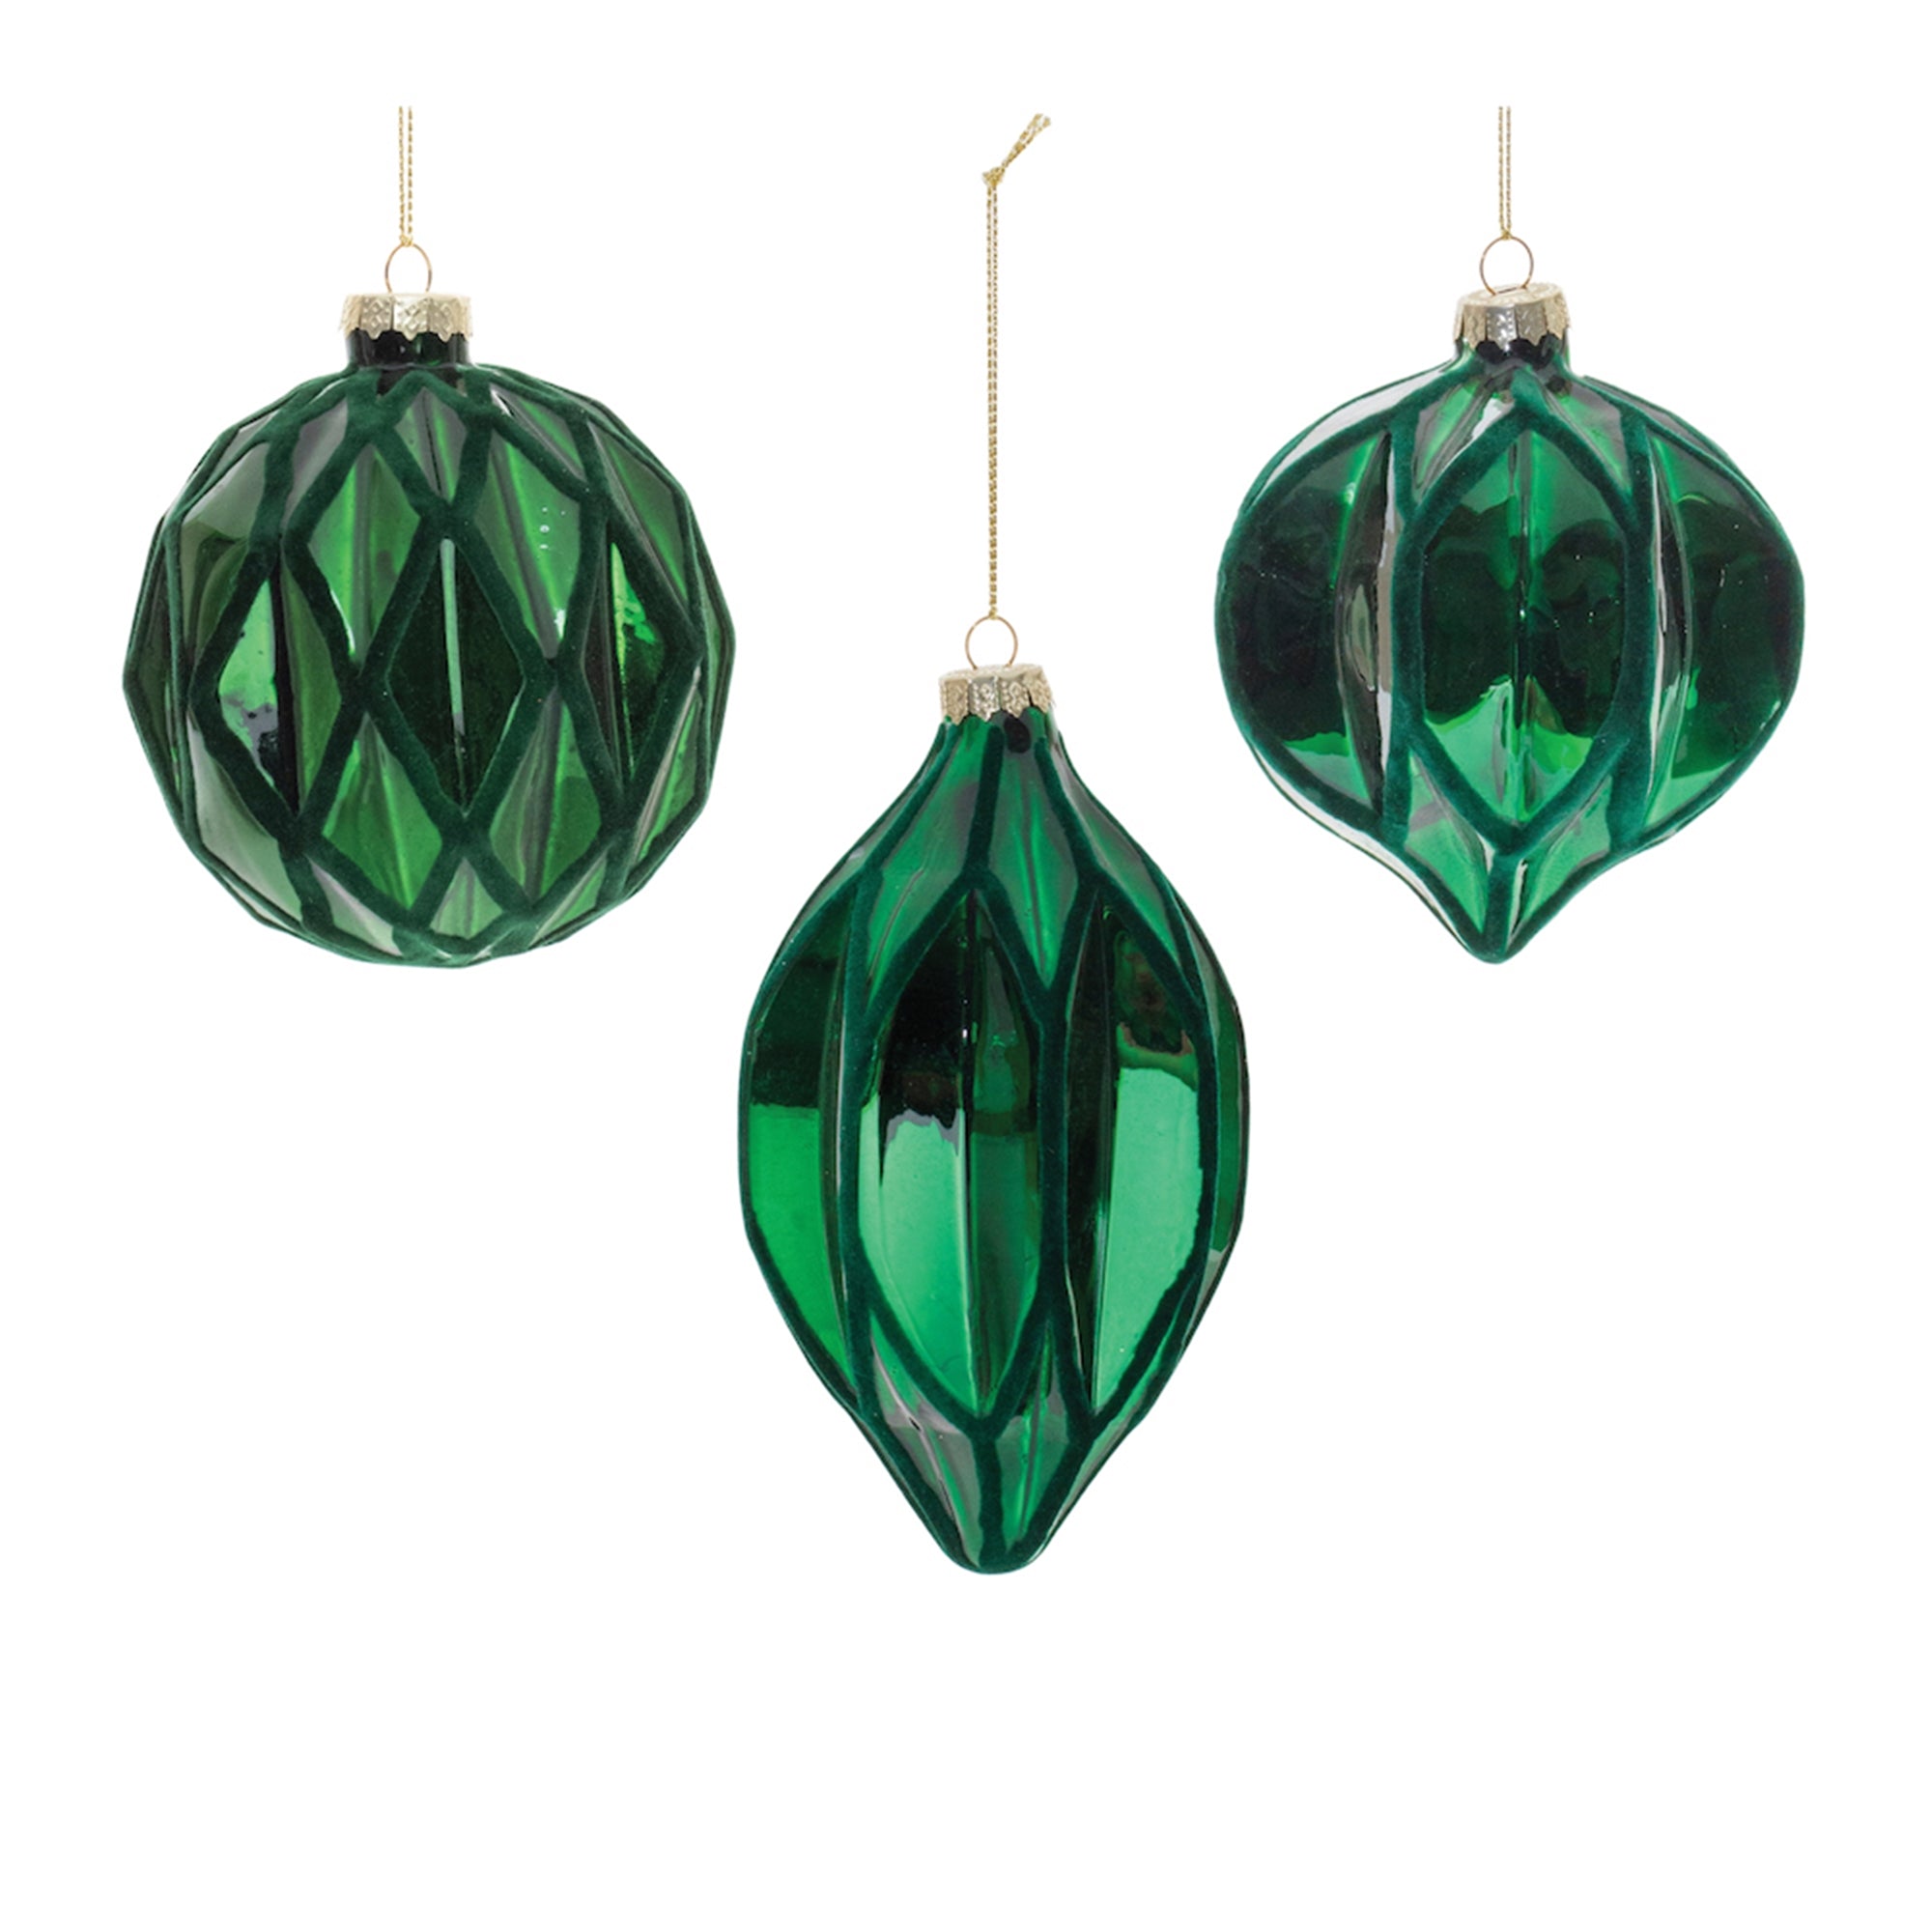 Green Textured Harlequin Glass Ornament (Set of 6)